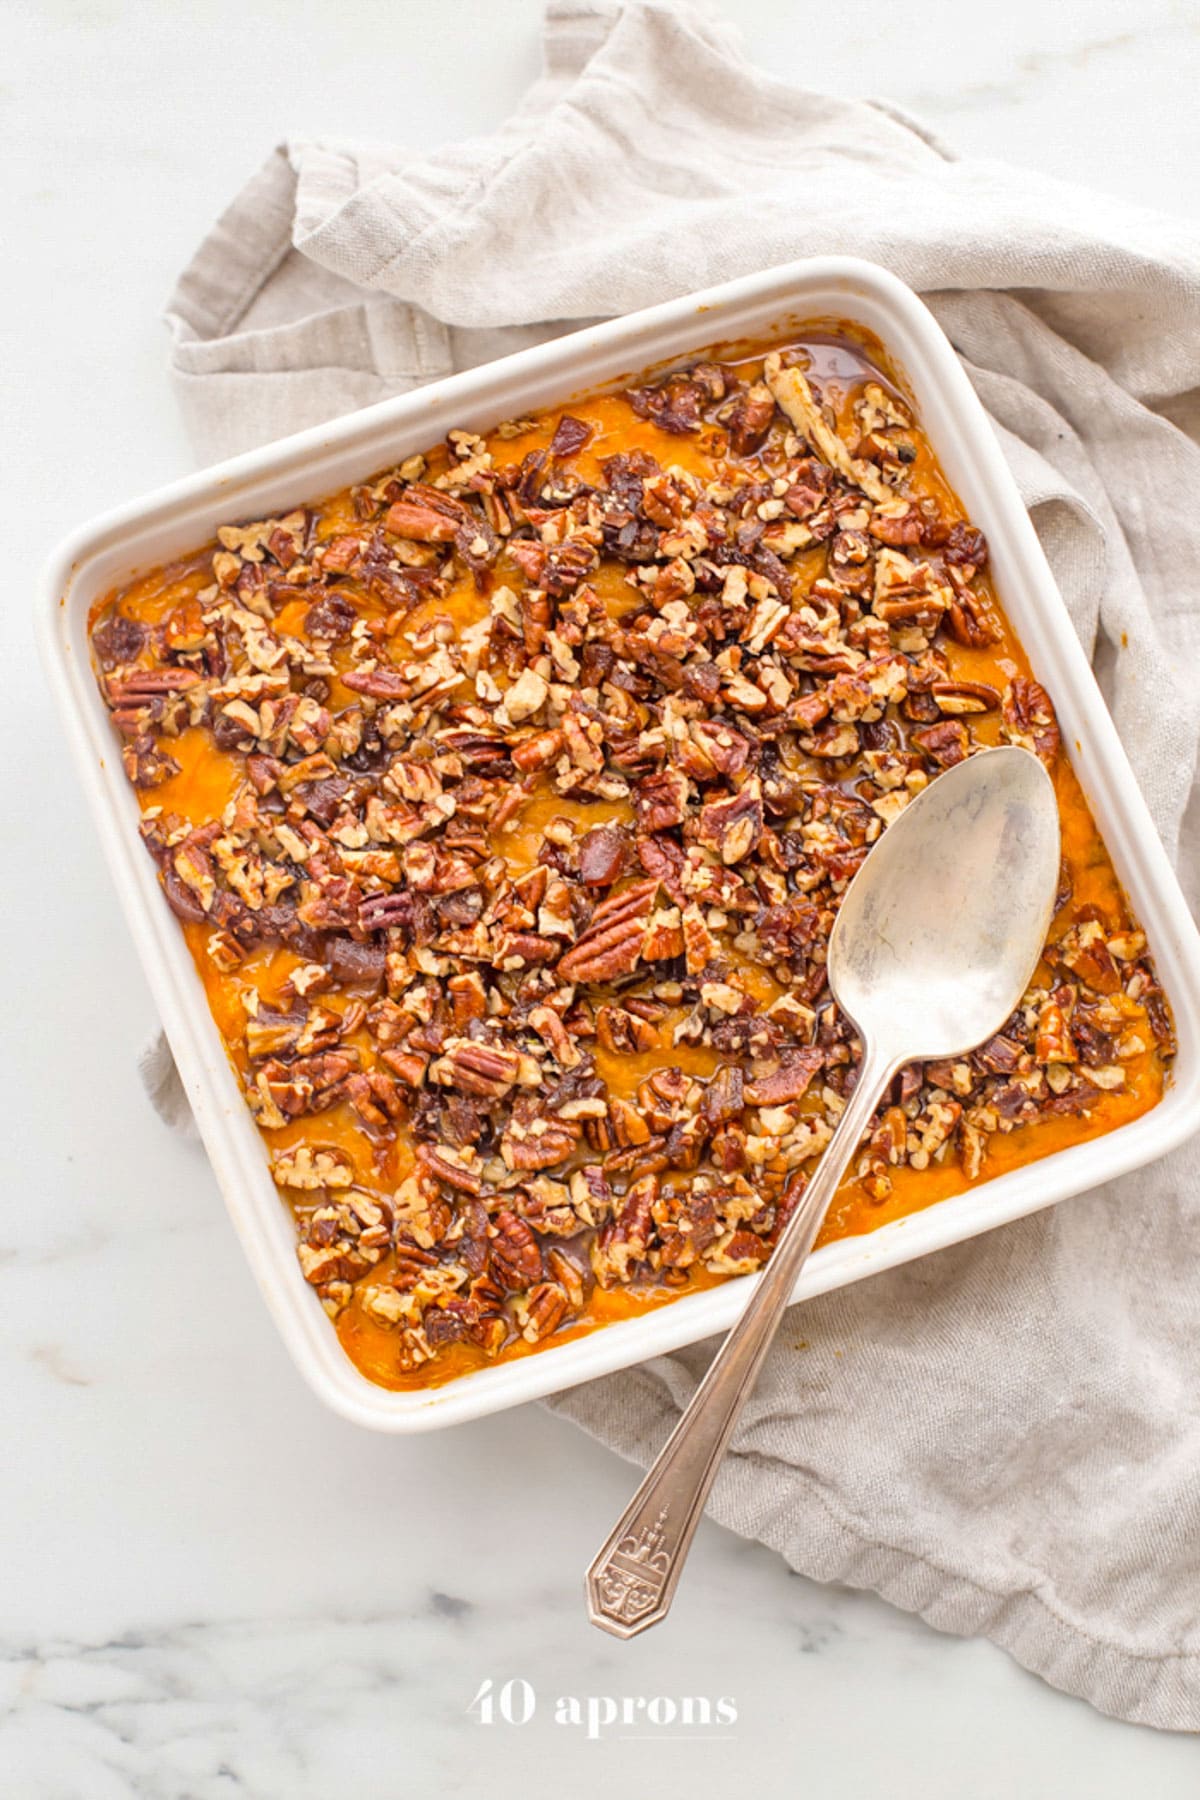 Overhead view of a square casserole dish holding a Whole30 sweet potato casserole topped with pecans.